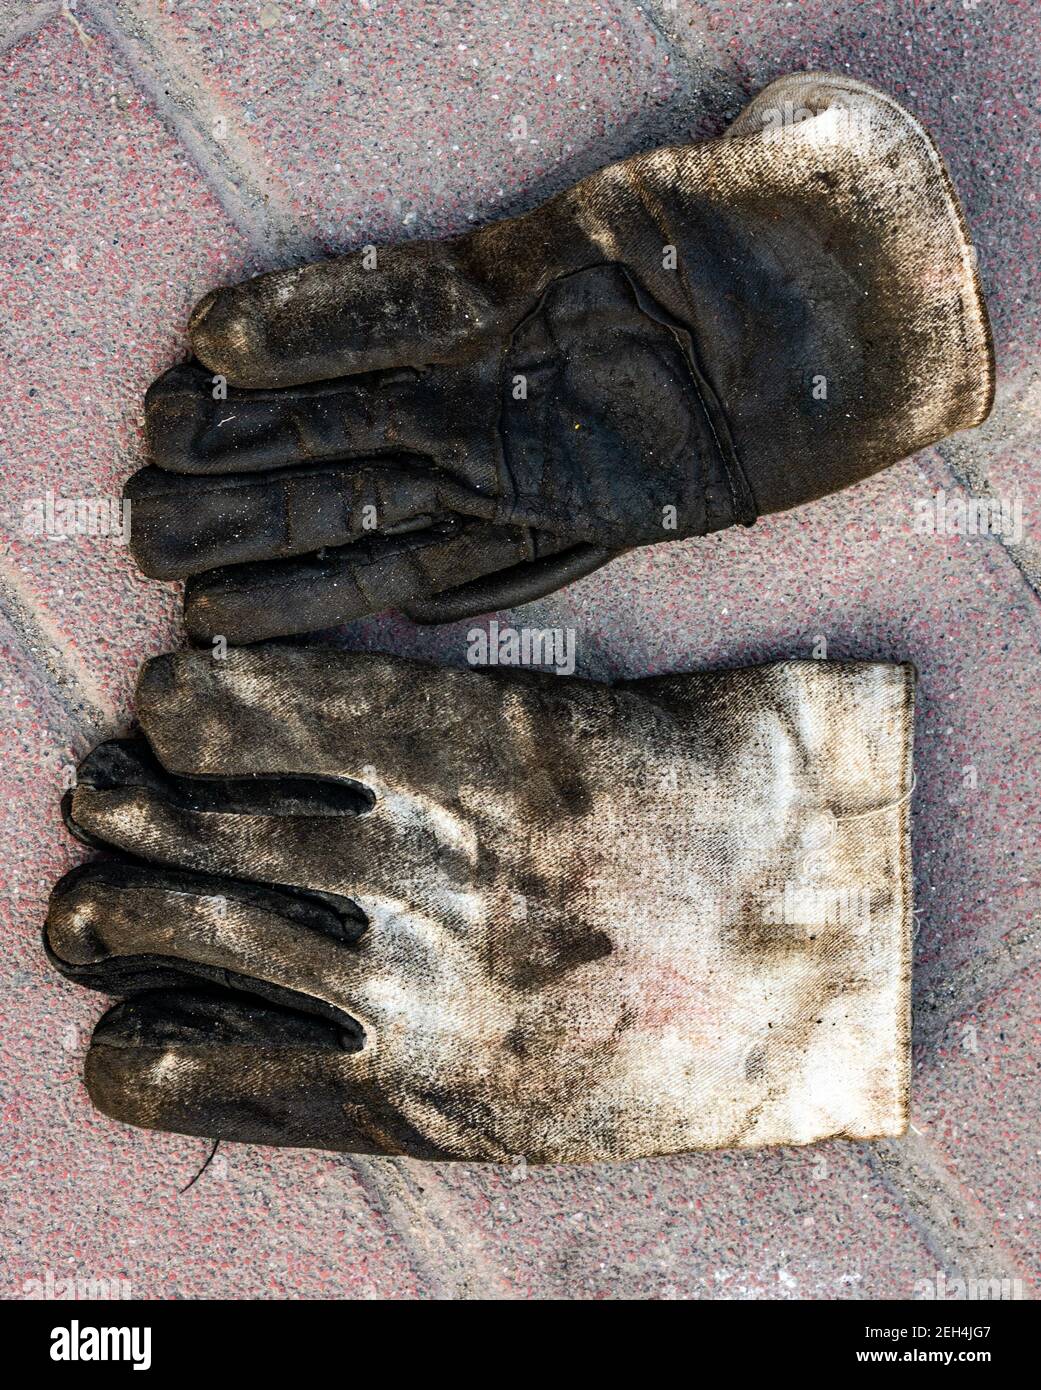 Stained and grimy work gloves Stock Photo